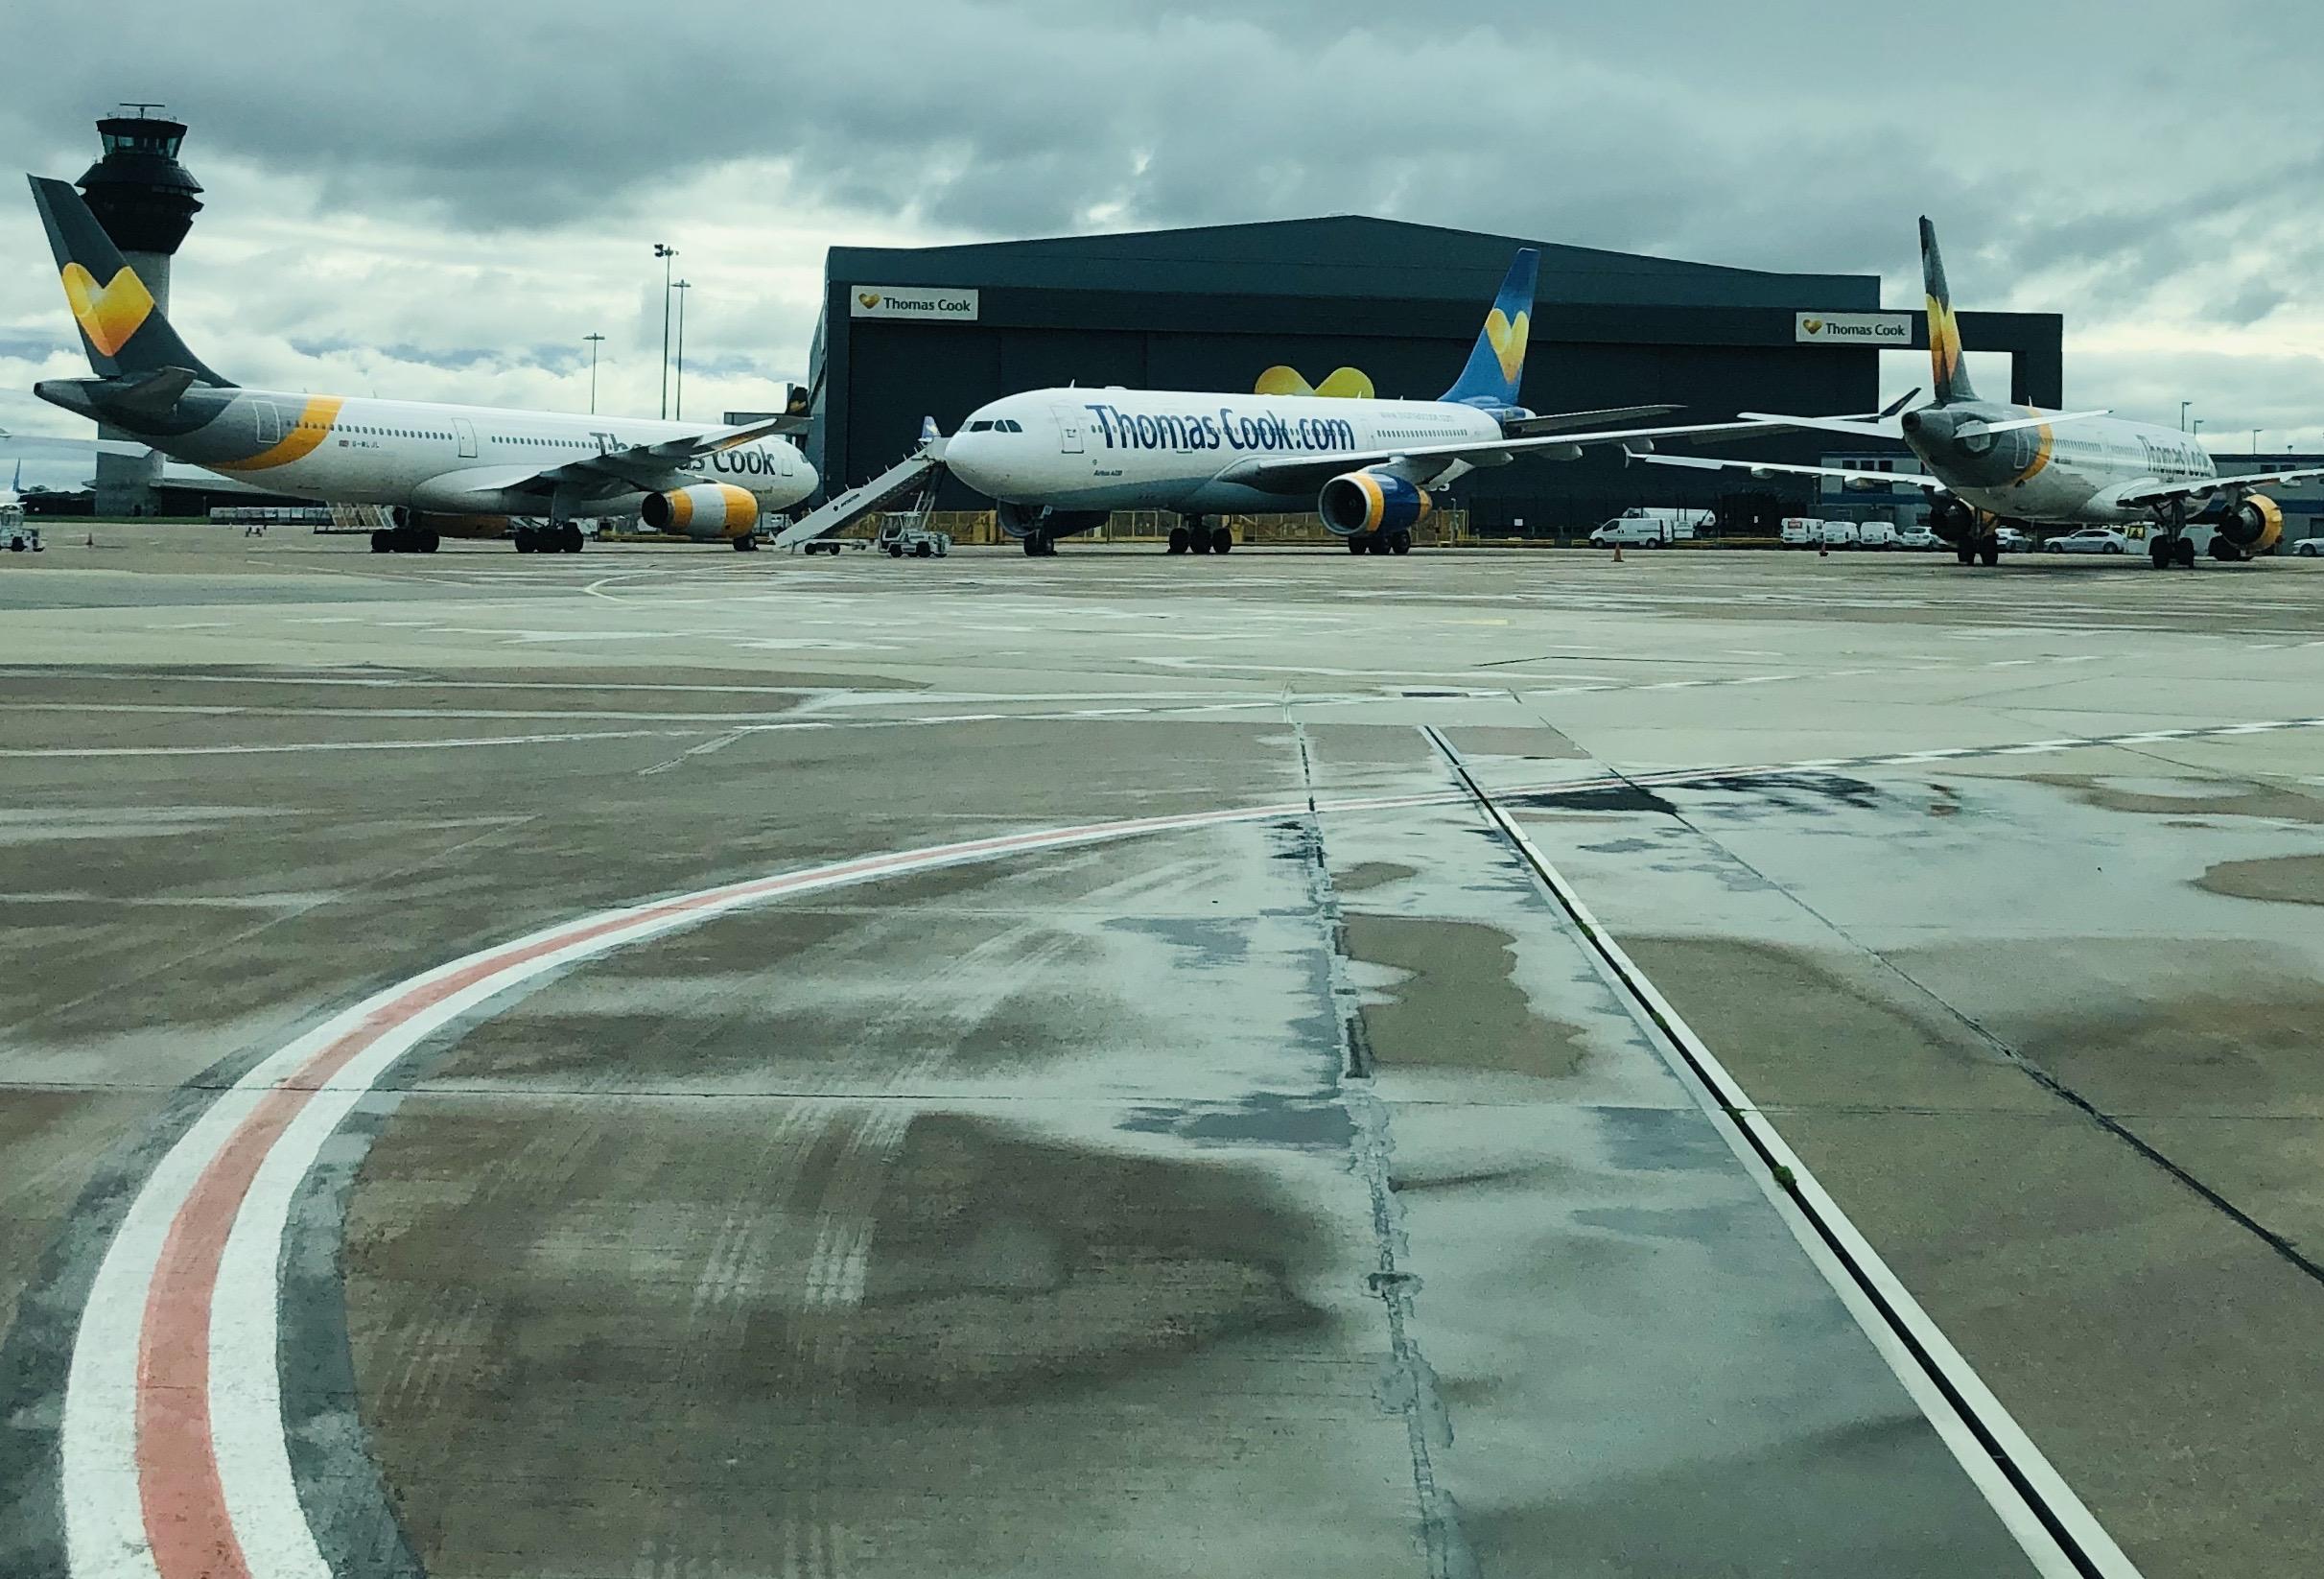 Going nowhere: Thomas Cook Airlines planes at Manchester airport. The company’s collapse will take 900,000 seats out of the market this winter